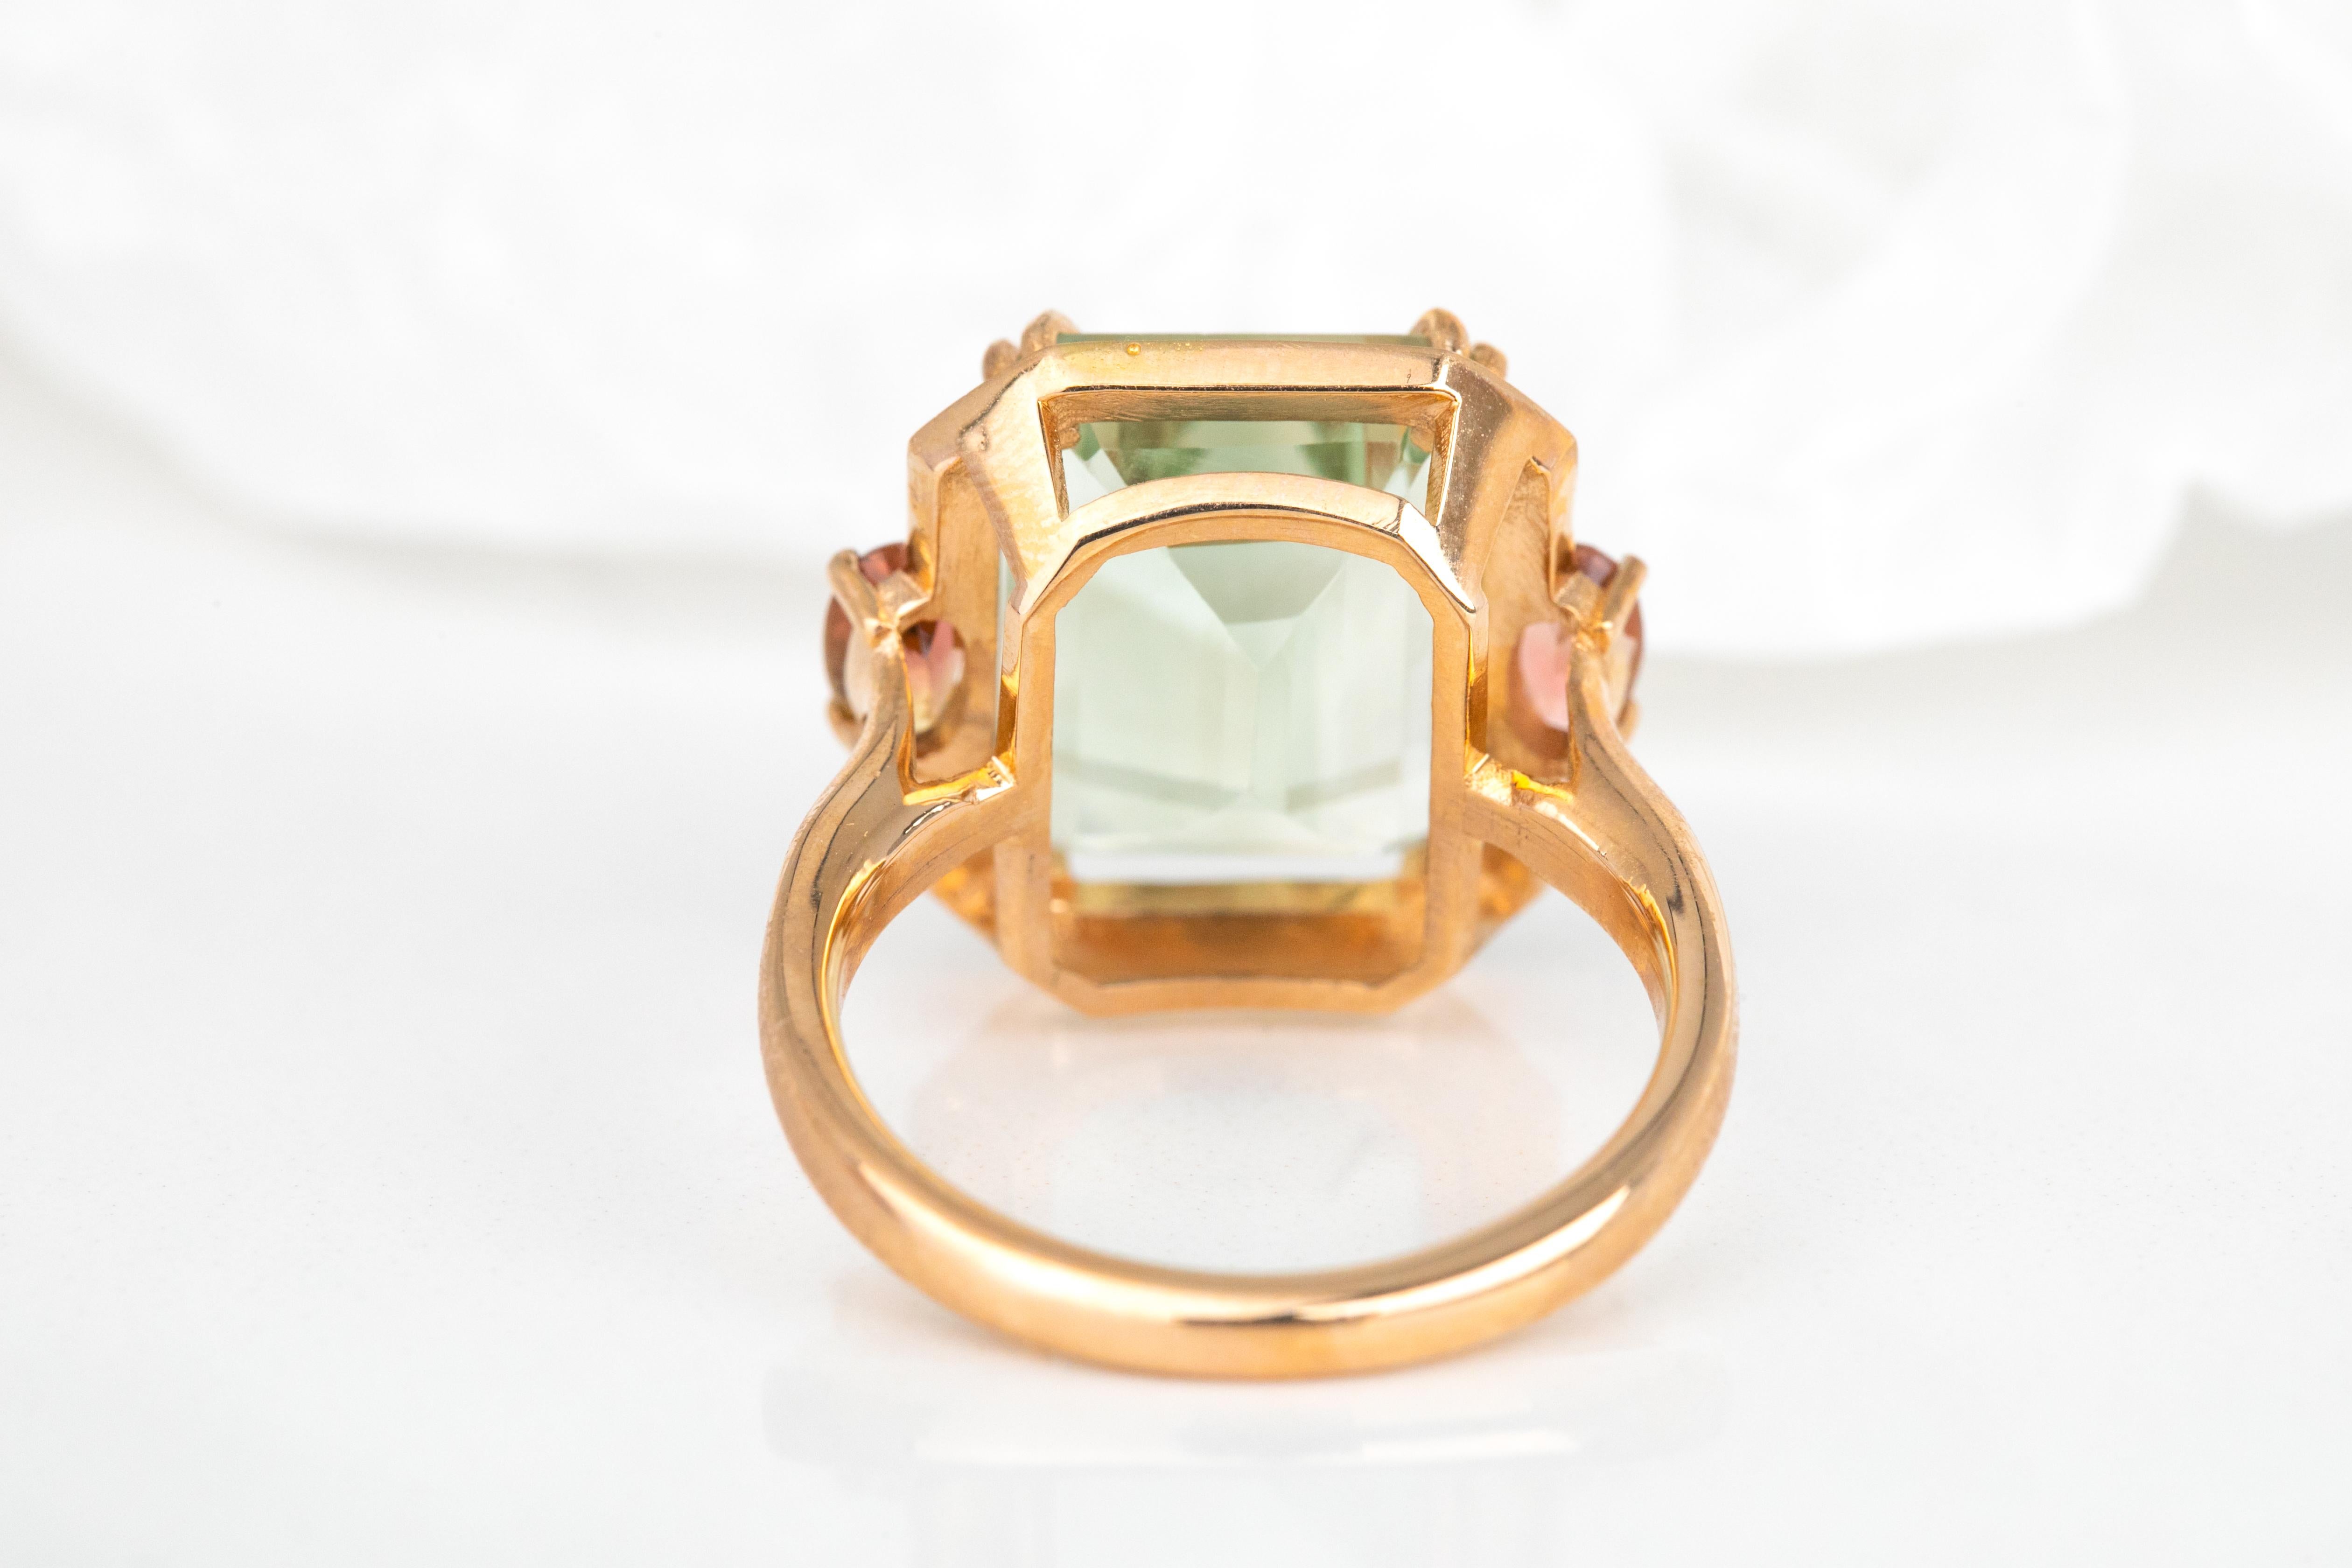 For Sale:  Artdeco Style Ring, 14k Solid Gold, Green Amethyst and Pink Tourmaline Stone Ring 4